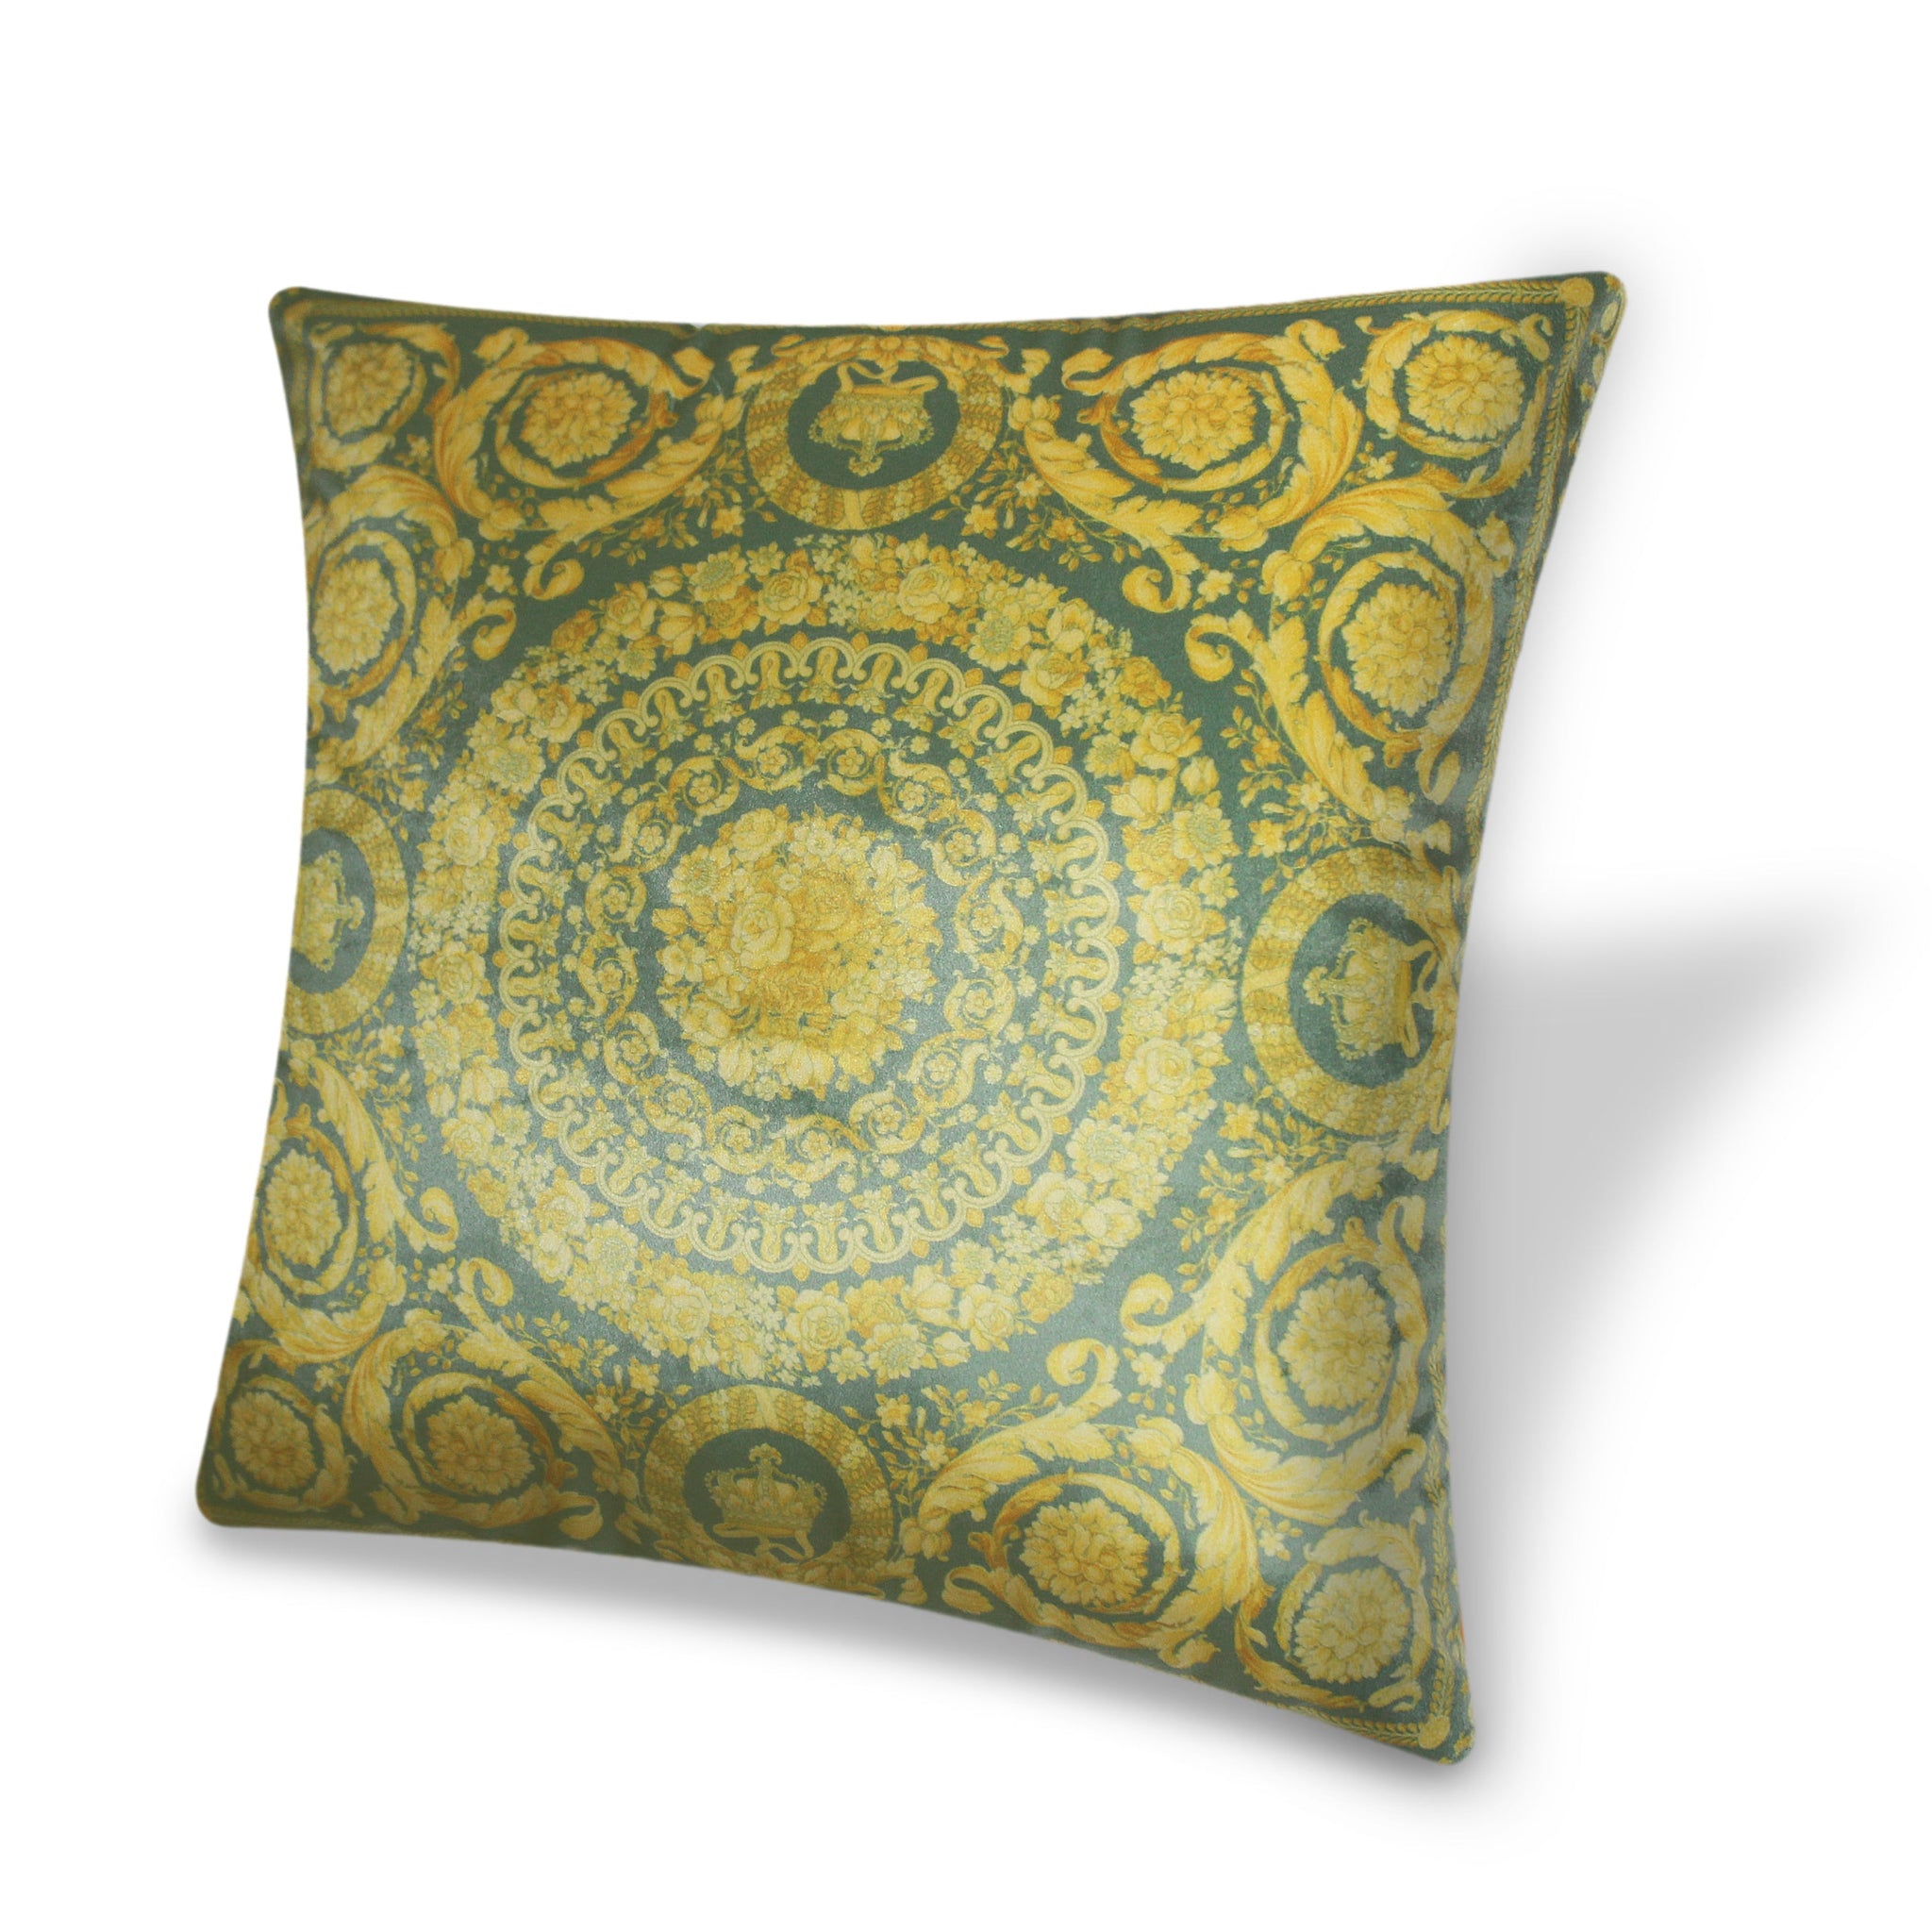 Green Velvet Cushion Cover Classic Baroque Style Decorative pillowcase Traditional Floral Motif Décor Throw Pillow for Sofa Chair Bedroom Living Room 45x45cm(18x18 Inches)